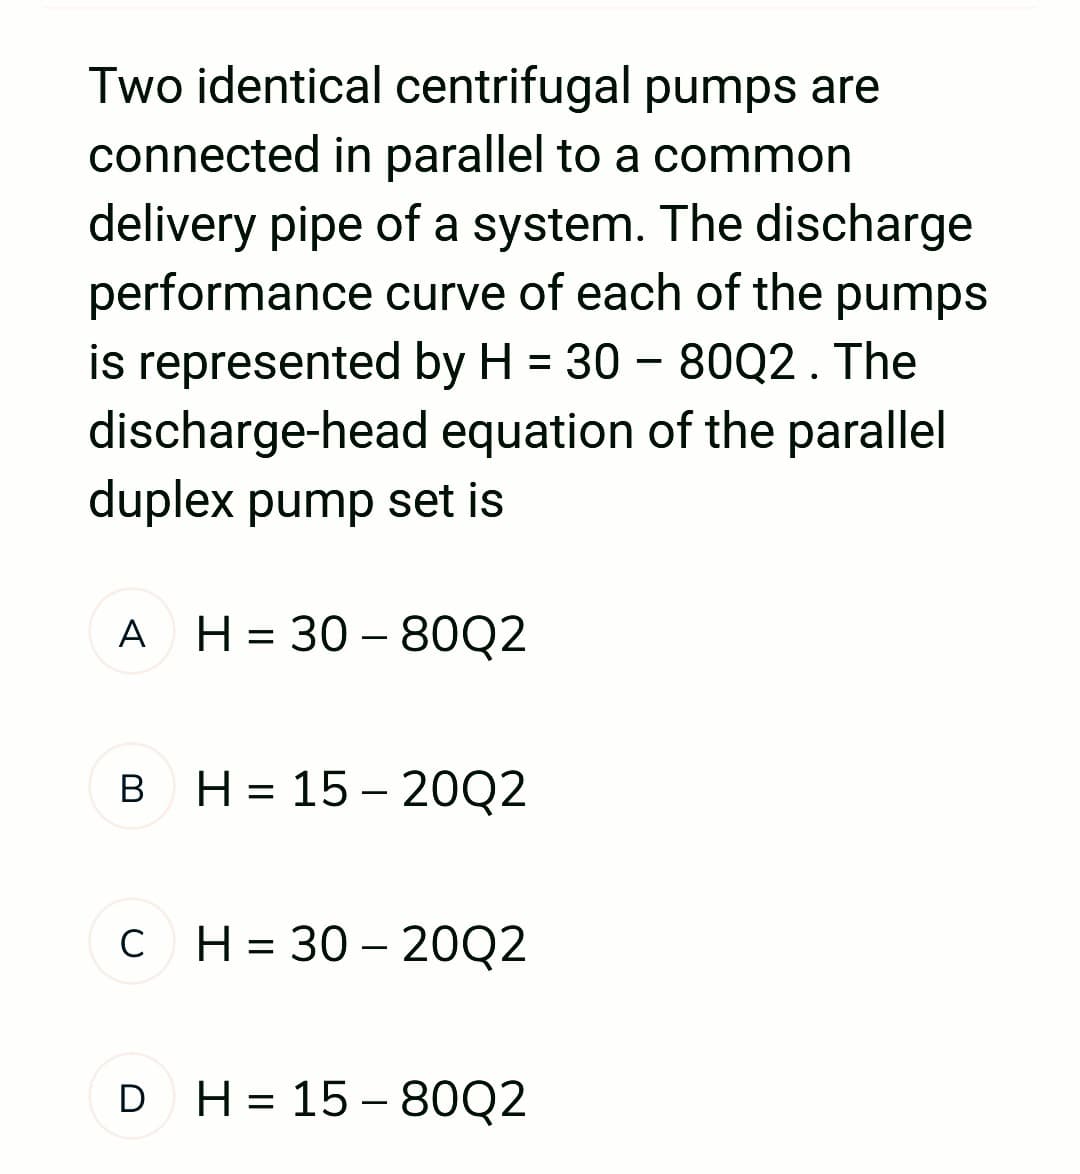 Two identical centrifugal pumps are
connected in parallel to a common
delivery pipe of a system. The discharge
performance curve of each of the pumps
is represented by H = 30 - 80Q2. The
discharge-head equation of the parallel
duplex pump set is
A H = 30-80Q2
B H=15-20Q2
C H=30-20Q2
с
D H= 15-80Q2